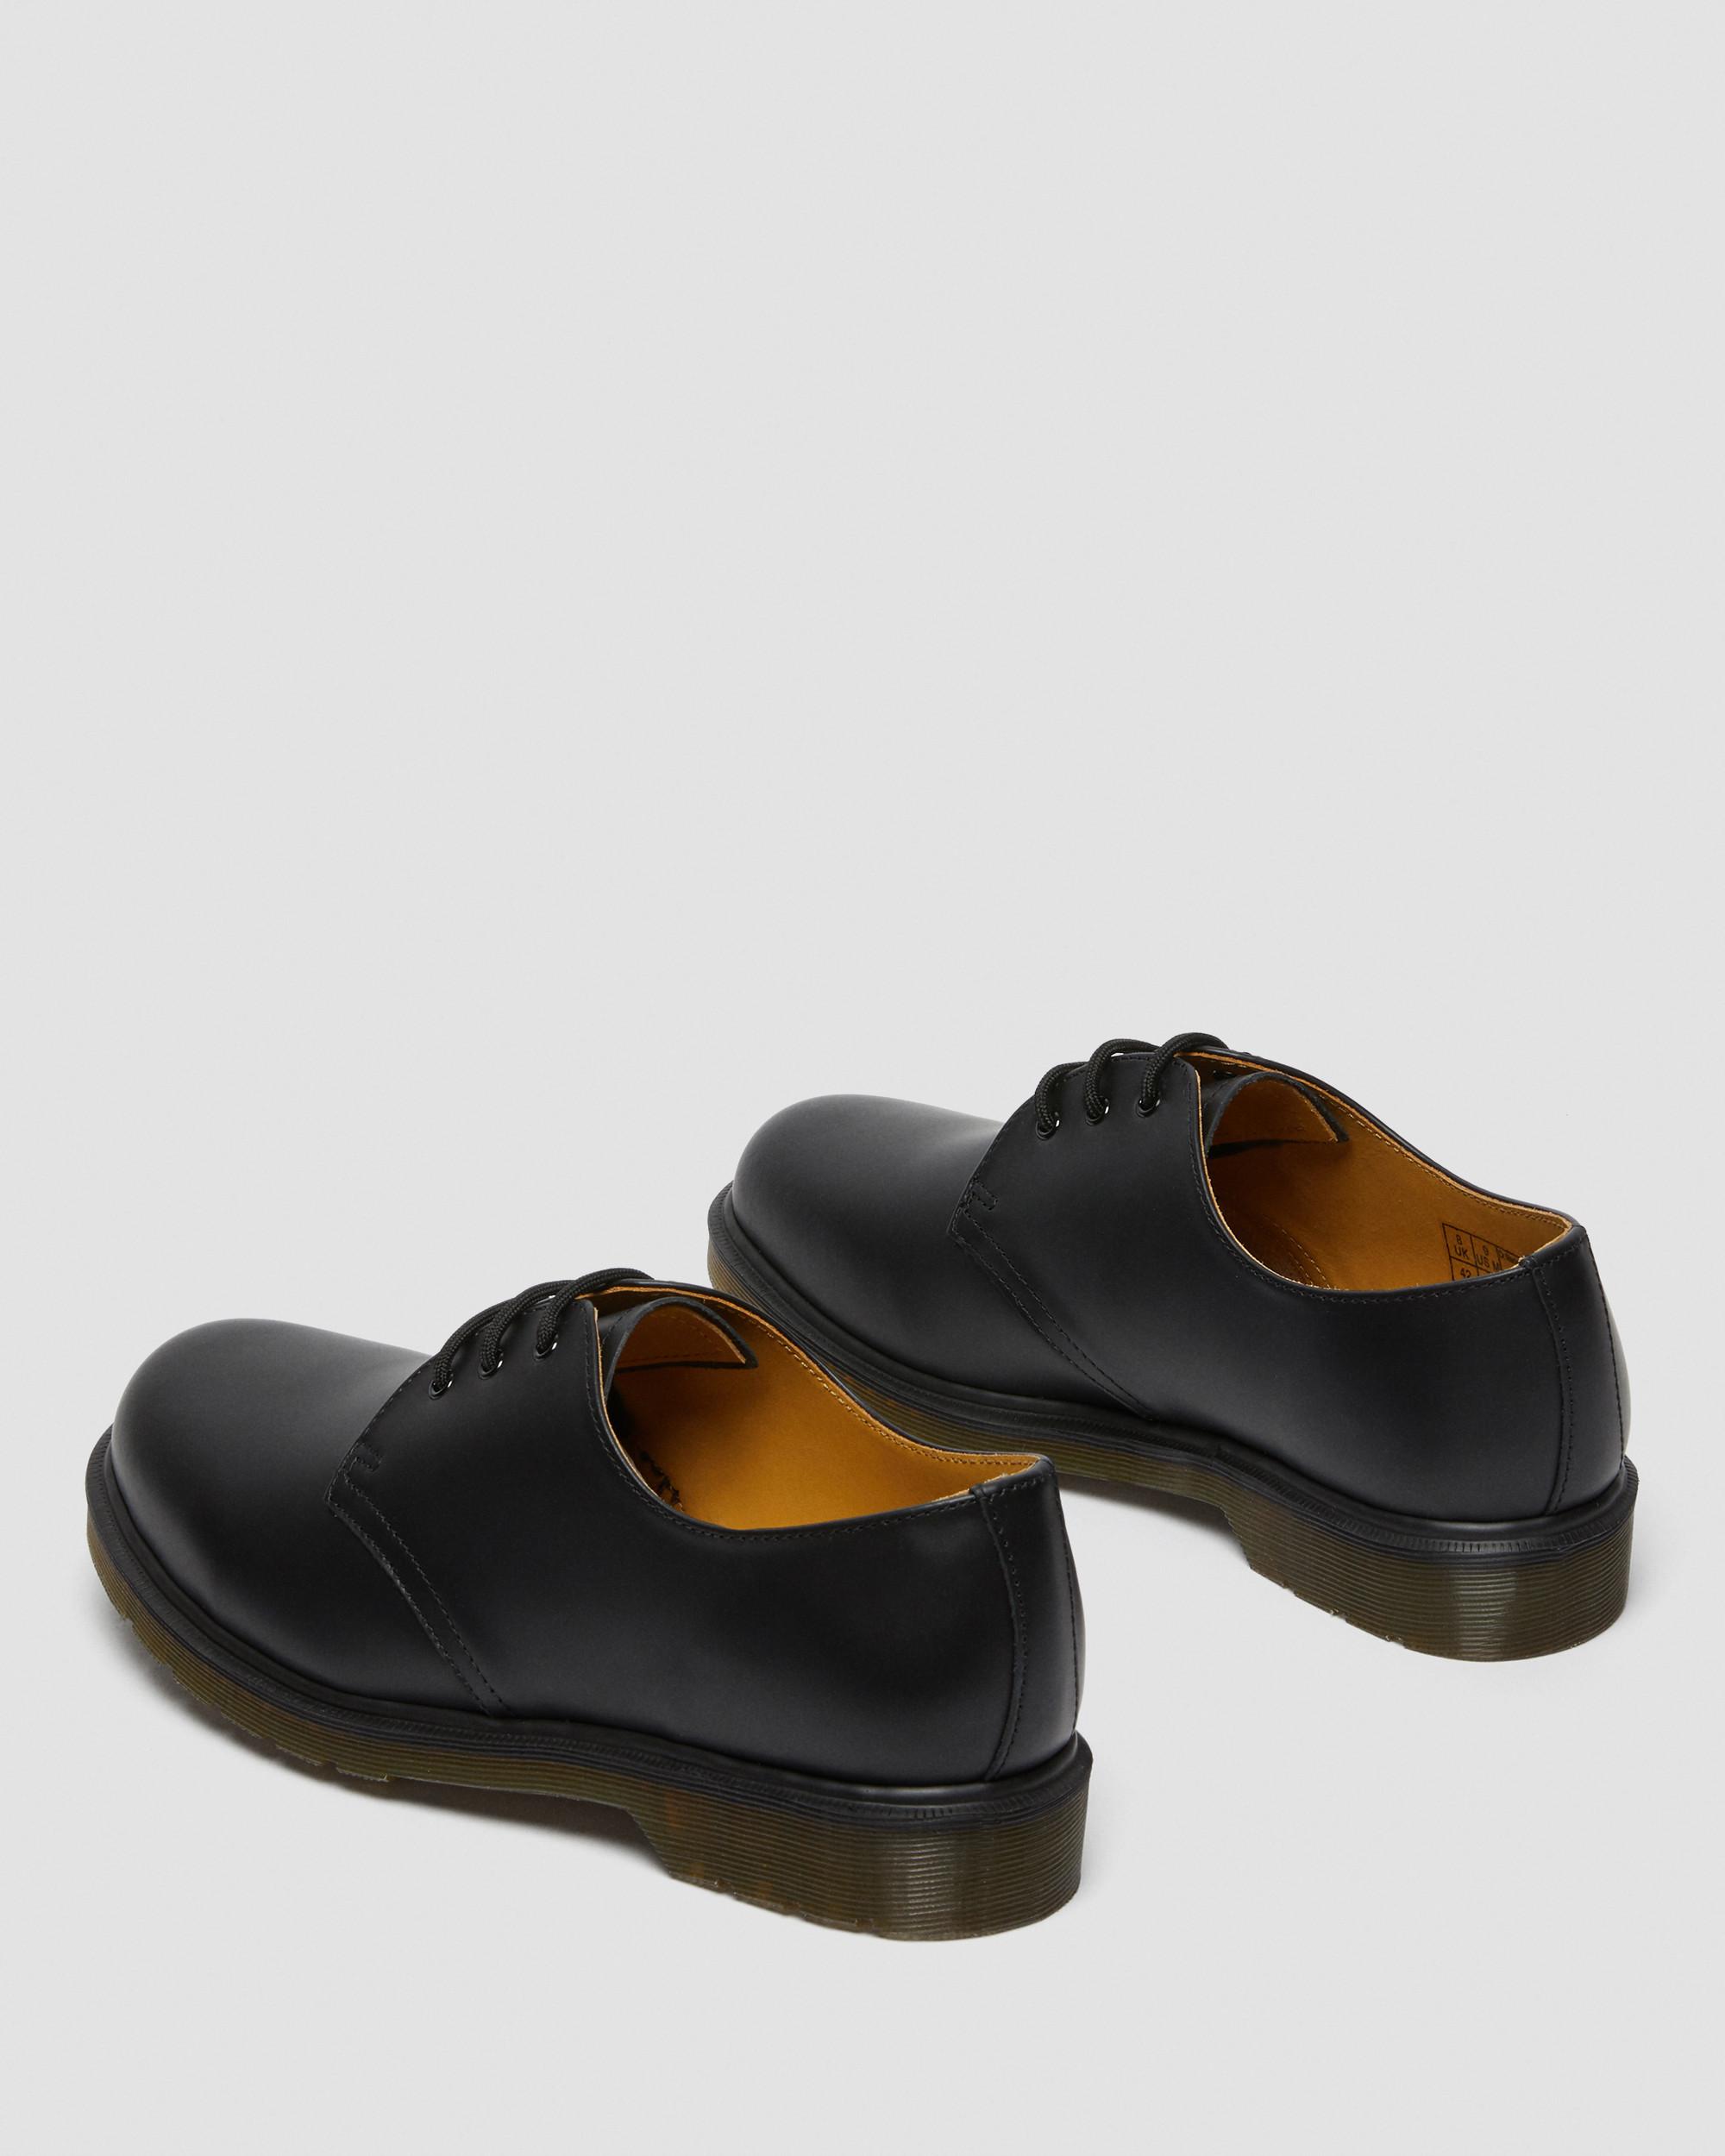 DR MARTENS 1461 Plain Welt Smooth Leather Oxford Shoes